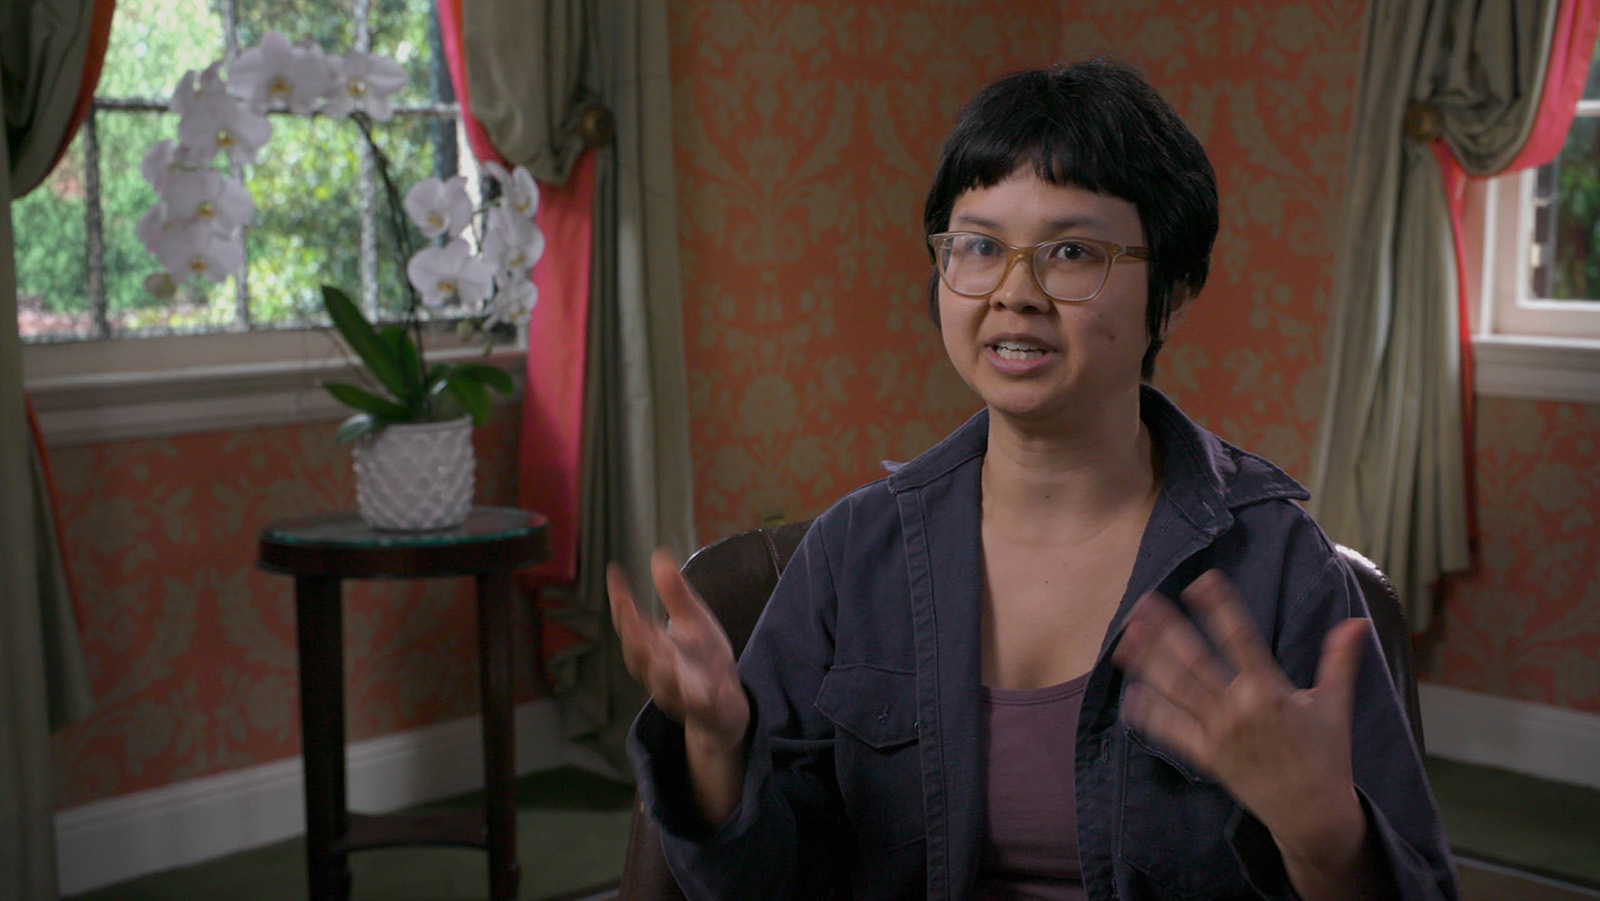 Charlyne Yi discusses her industry experiences in Brainwashed: Sex-Camera Power.